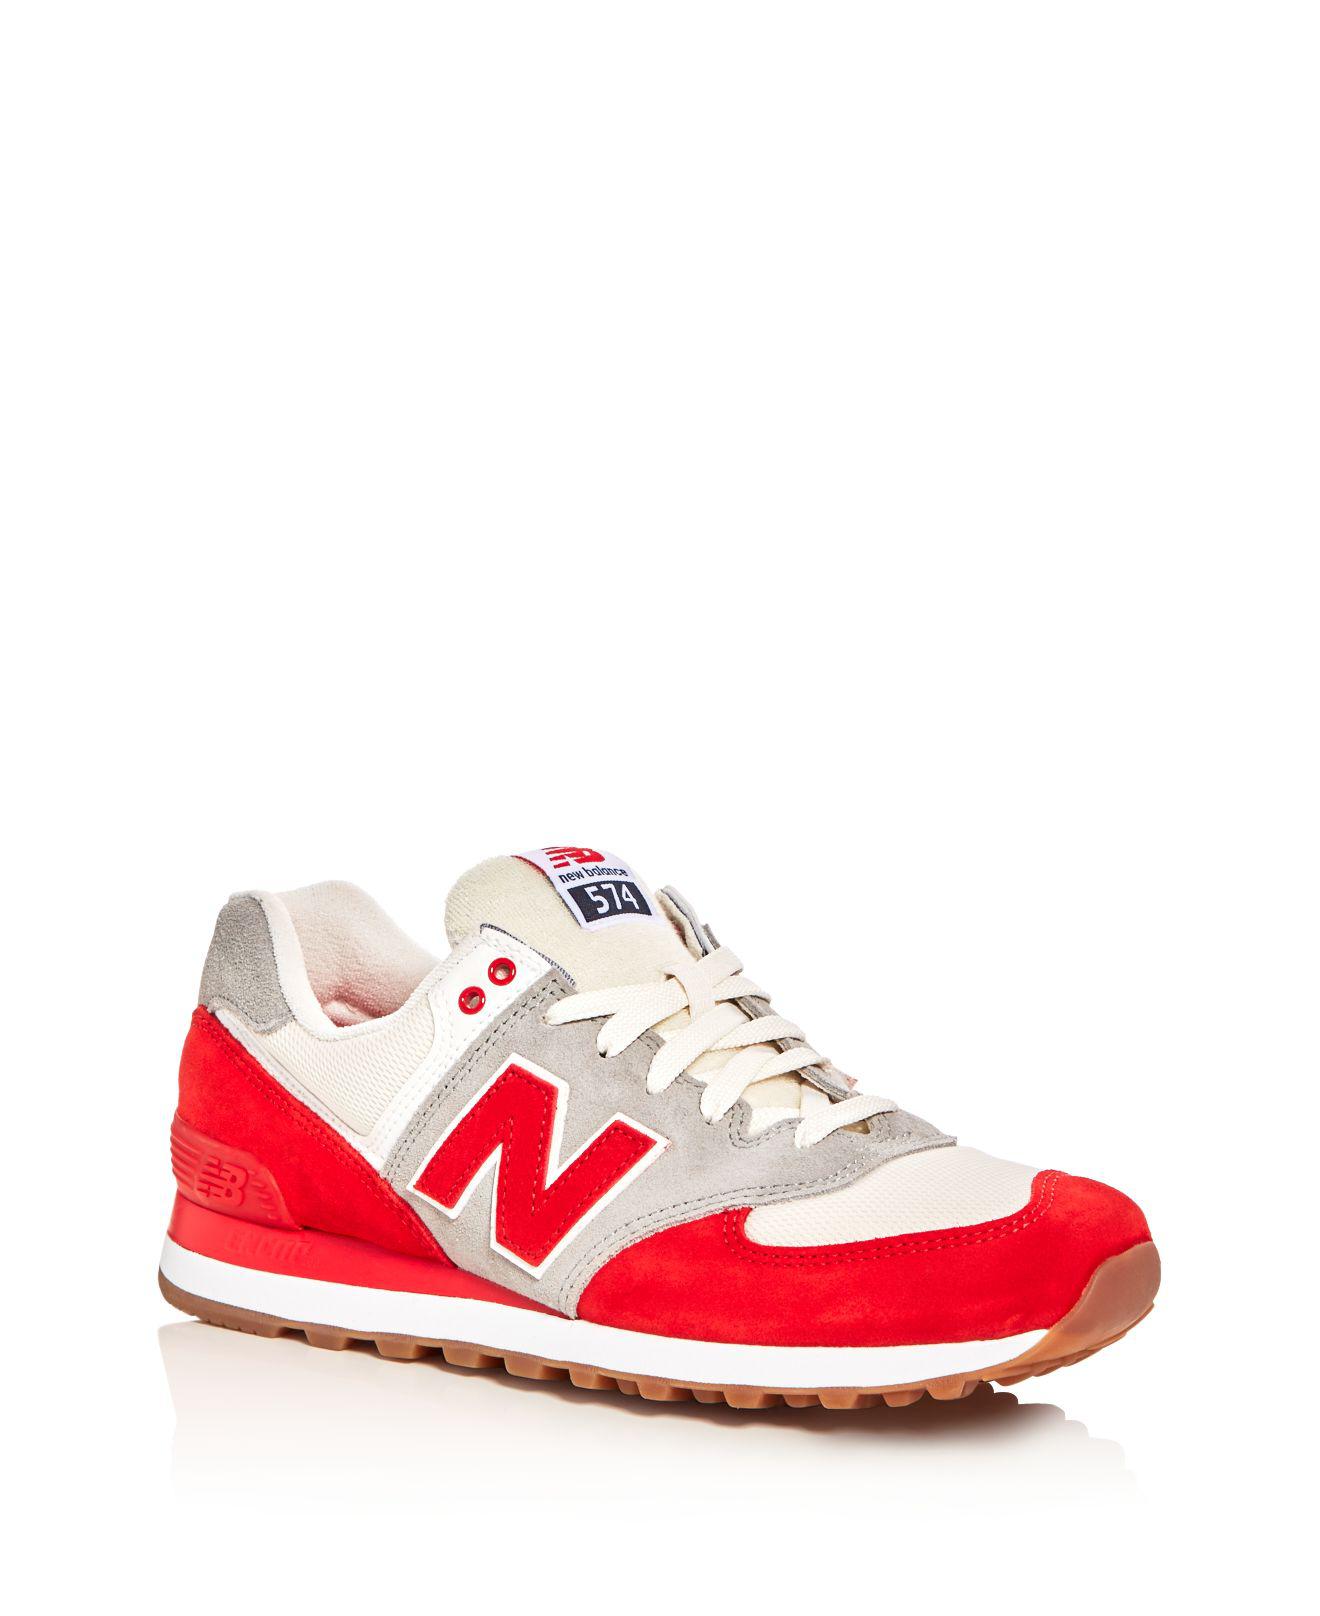 New Balance Men's 574 Retro Lace Up Sneakers in Red for Men - Lyst